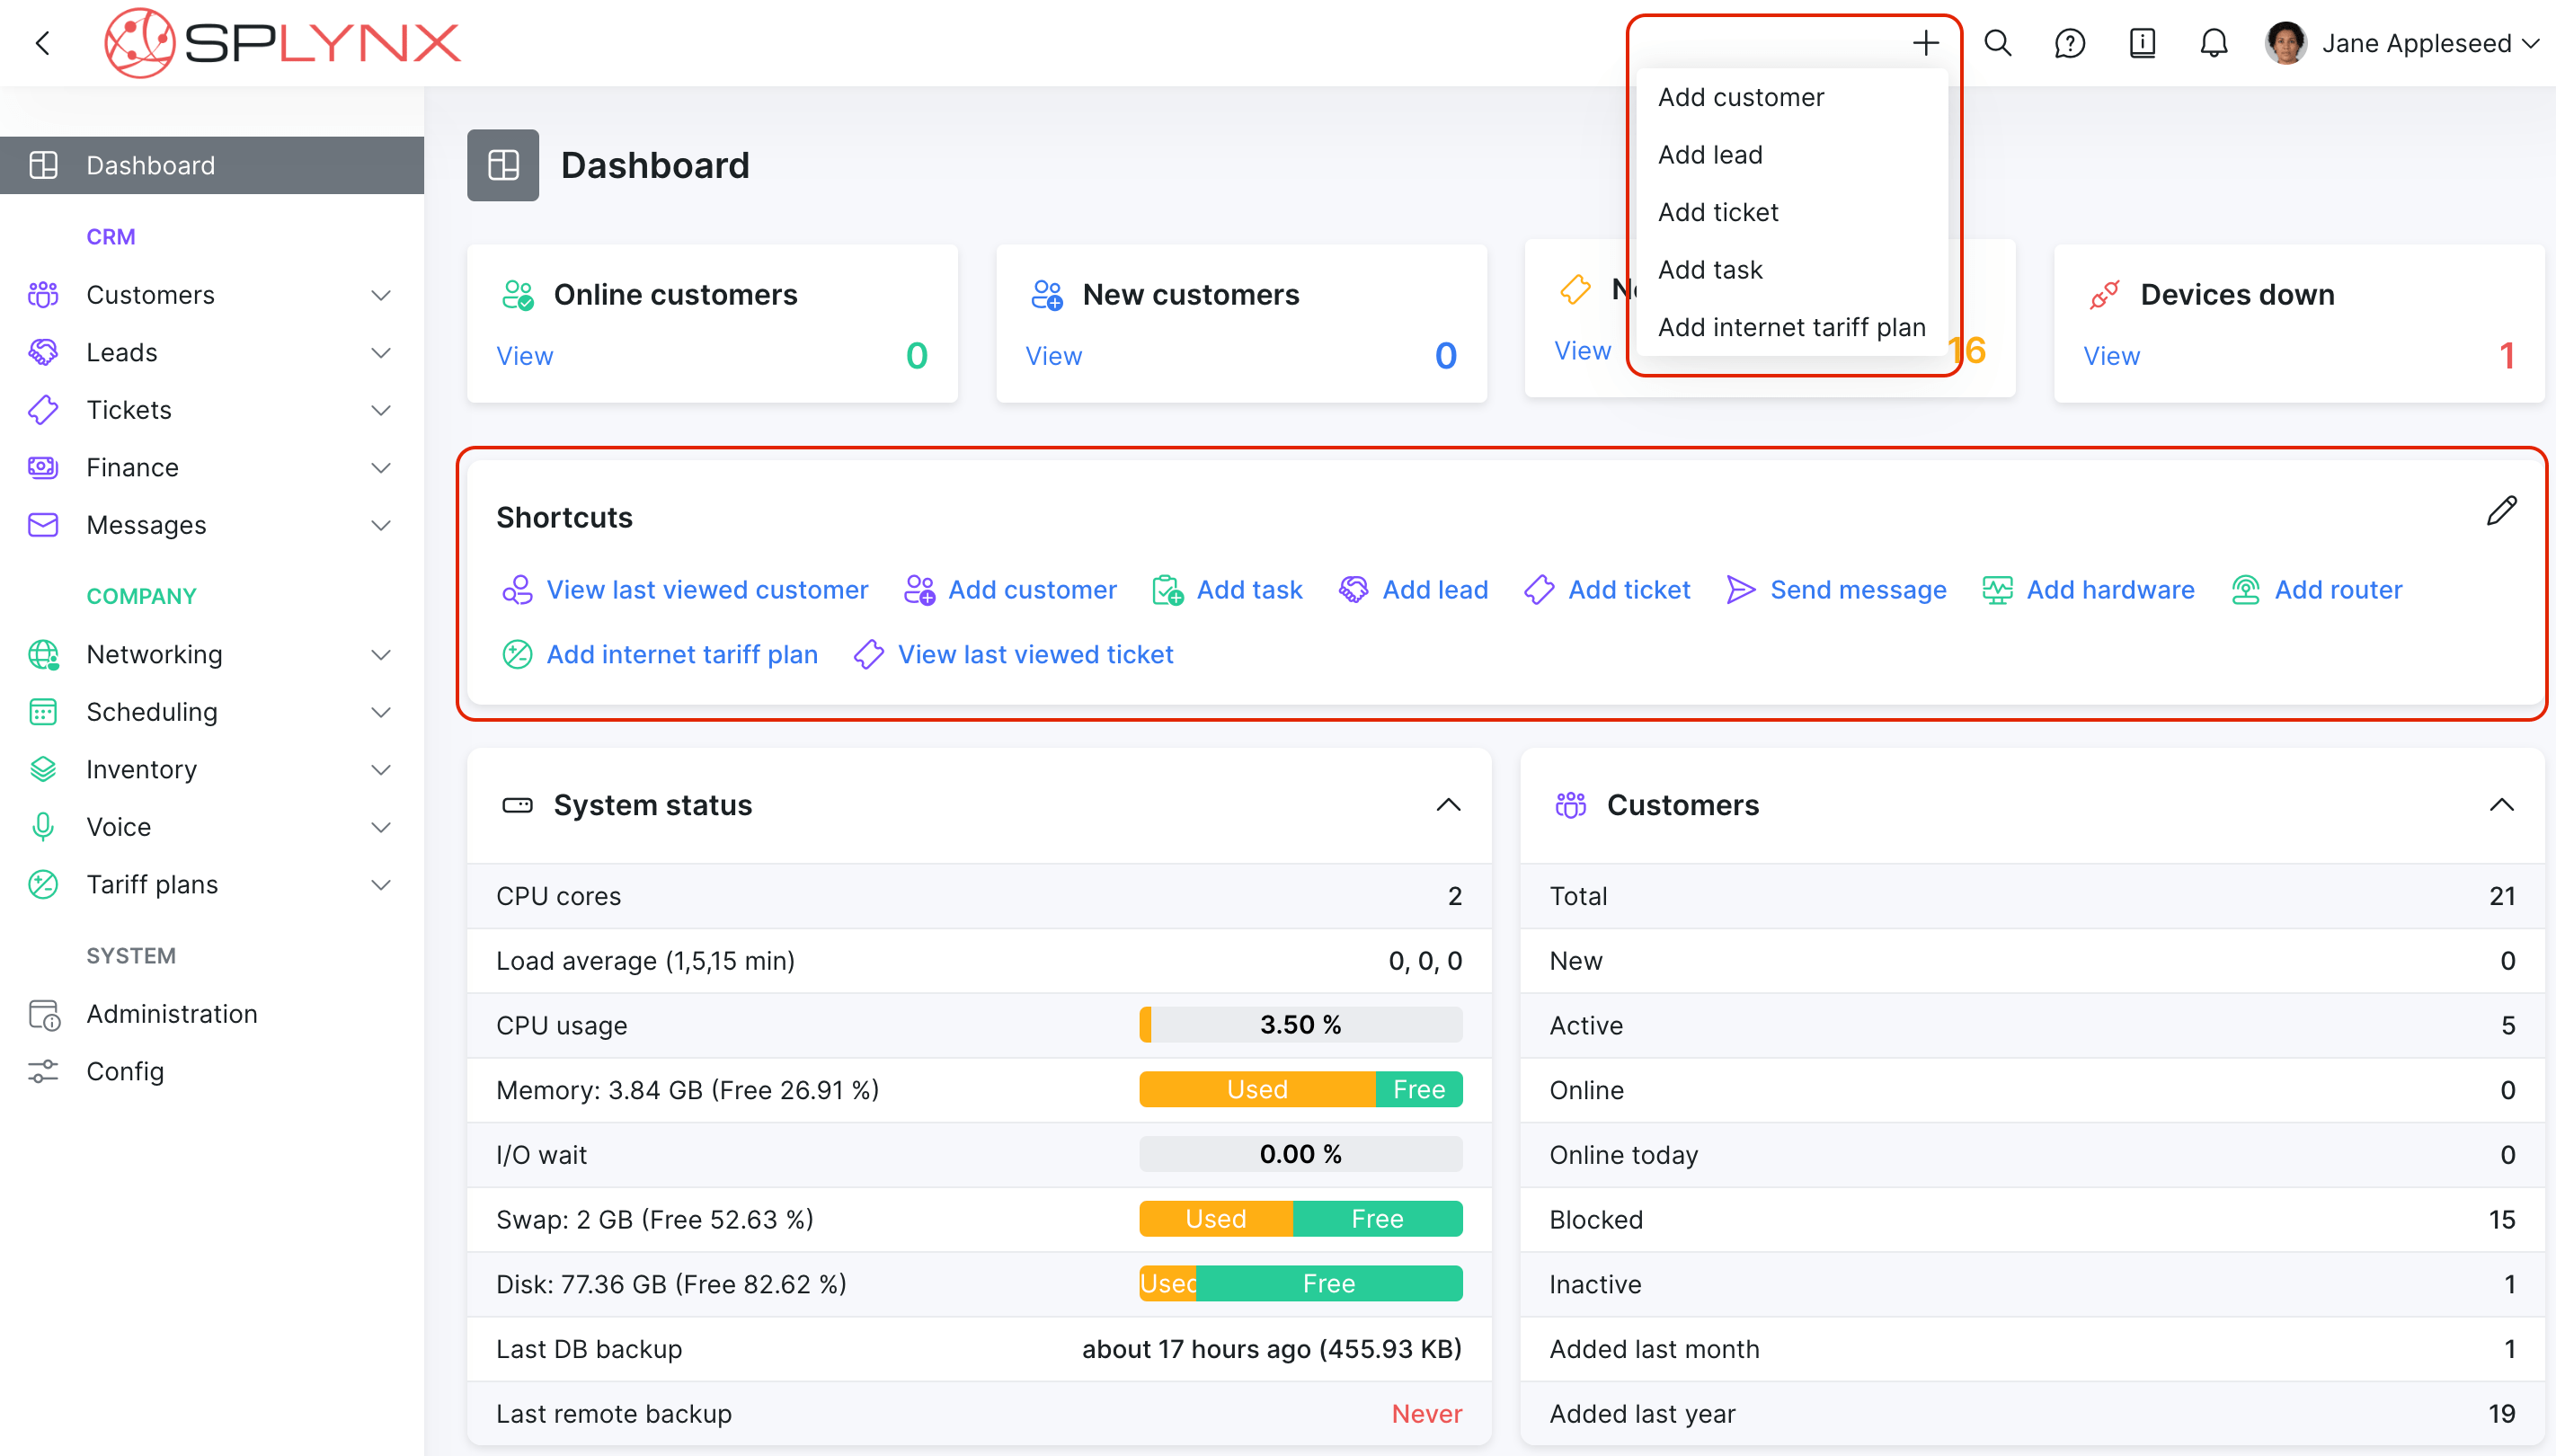 Splynx Dashboard shortcuts & Quick add feature